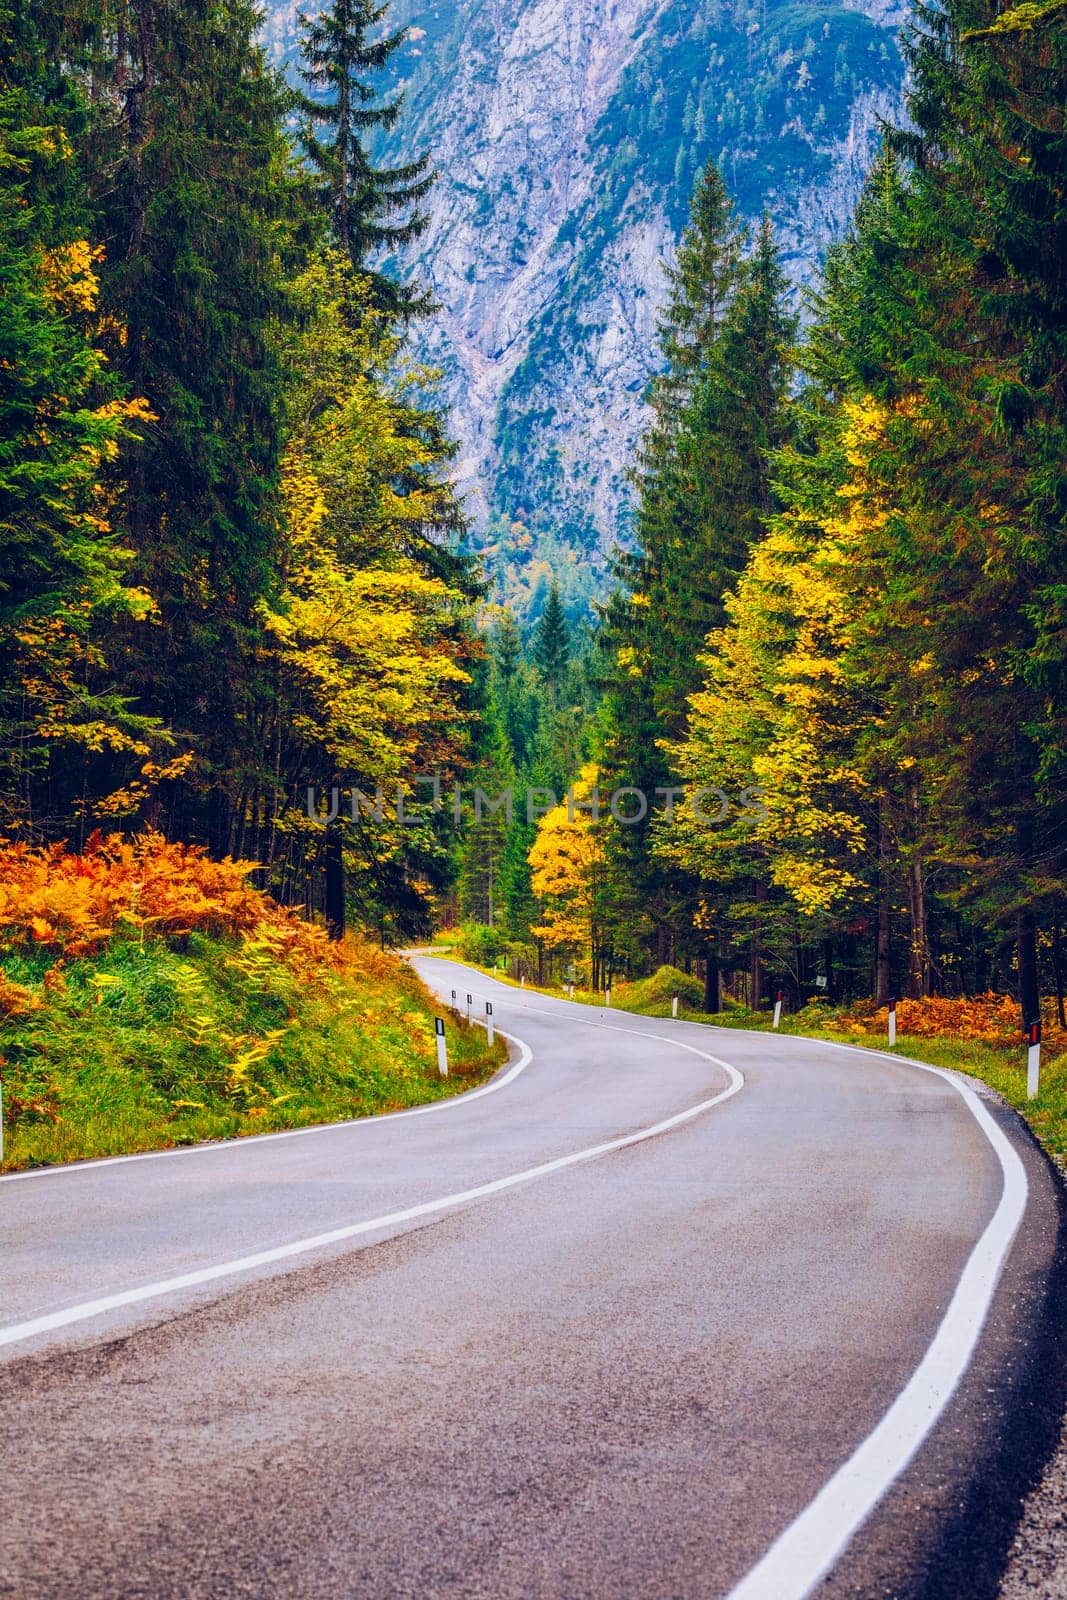 Mountain road. Landscape with rocks, sunny sky with clouds and beautiful asphalt road in the evening in summer. Vintage toning. Travel background. Highway in mountains.   by DaLiu